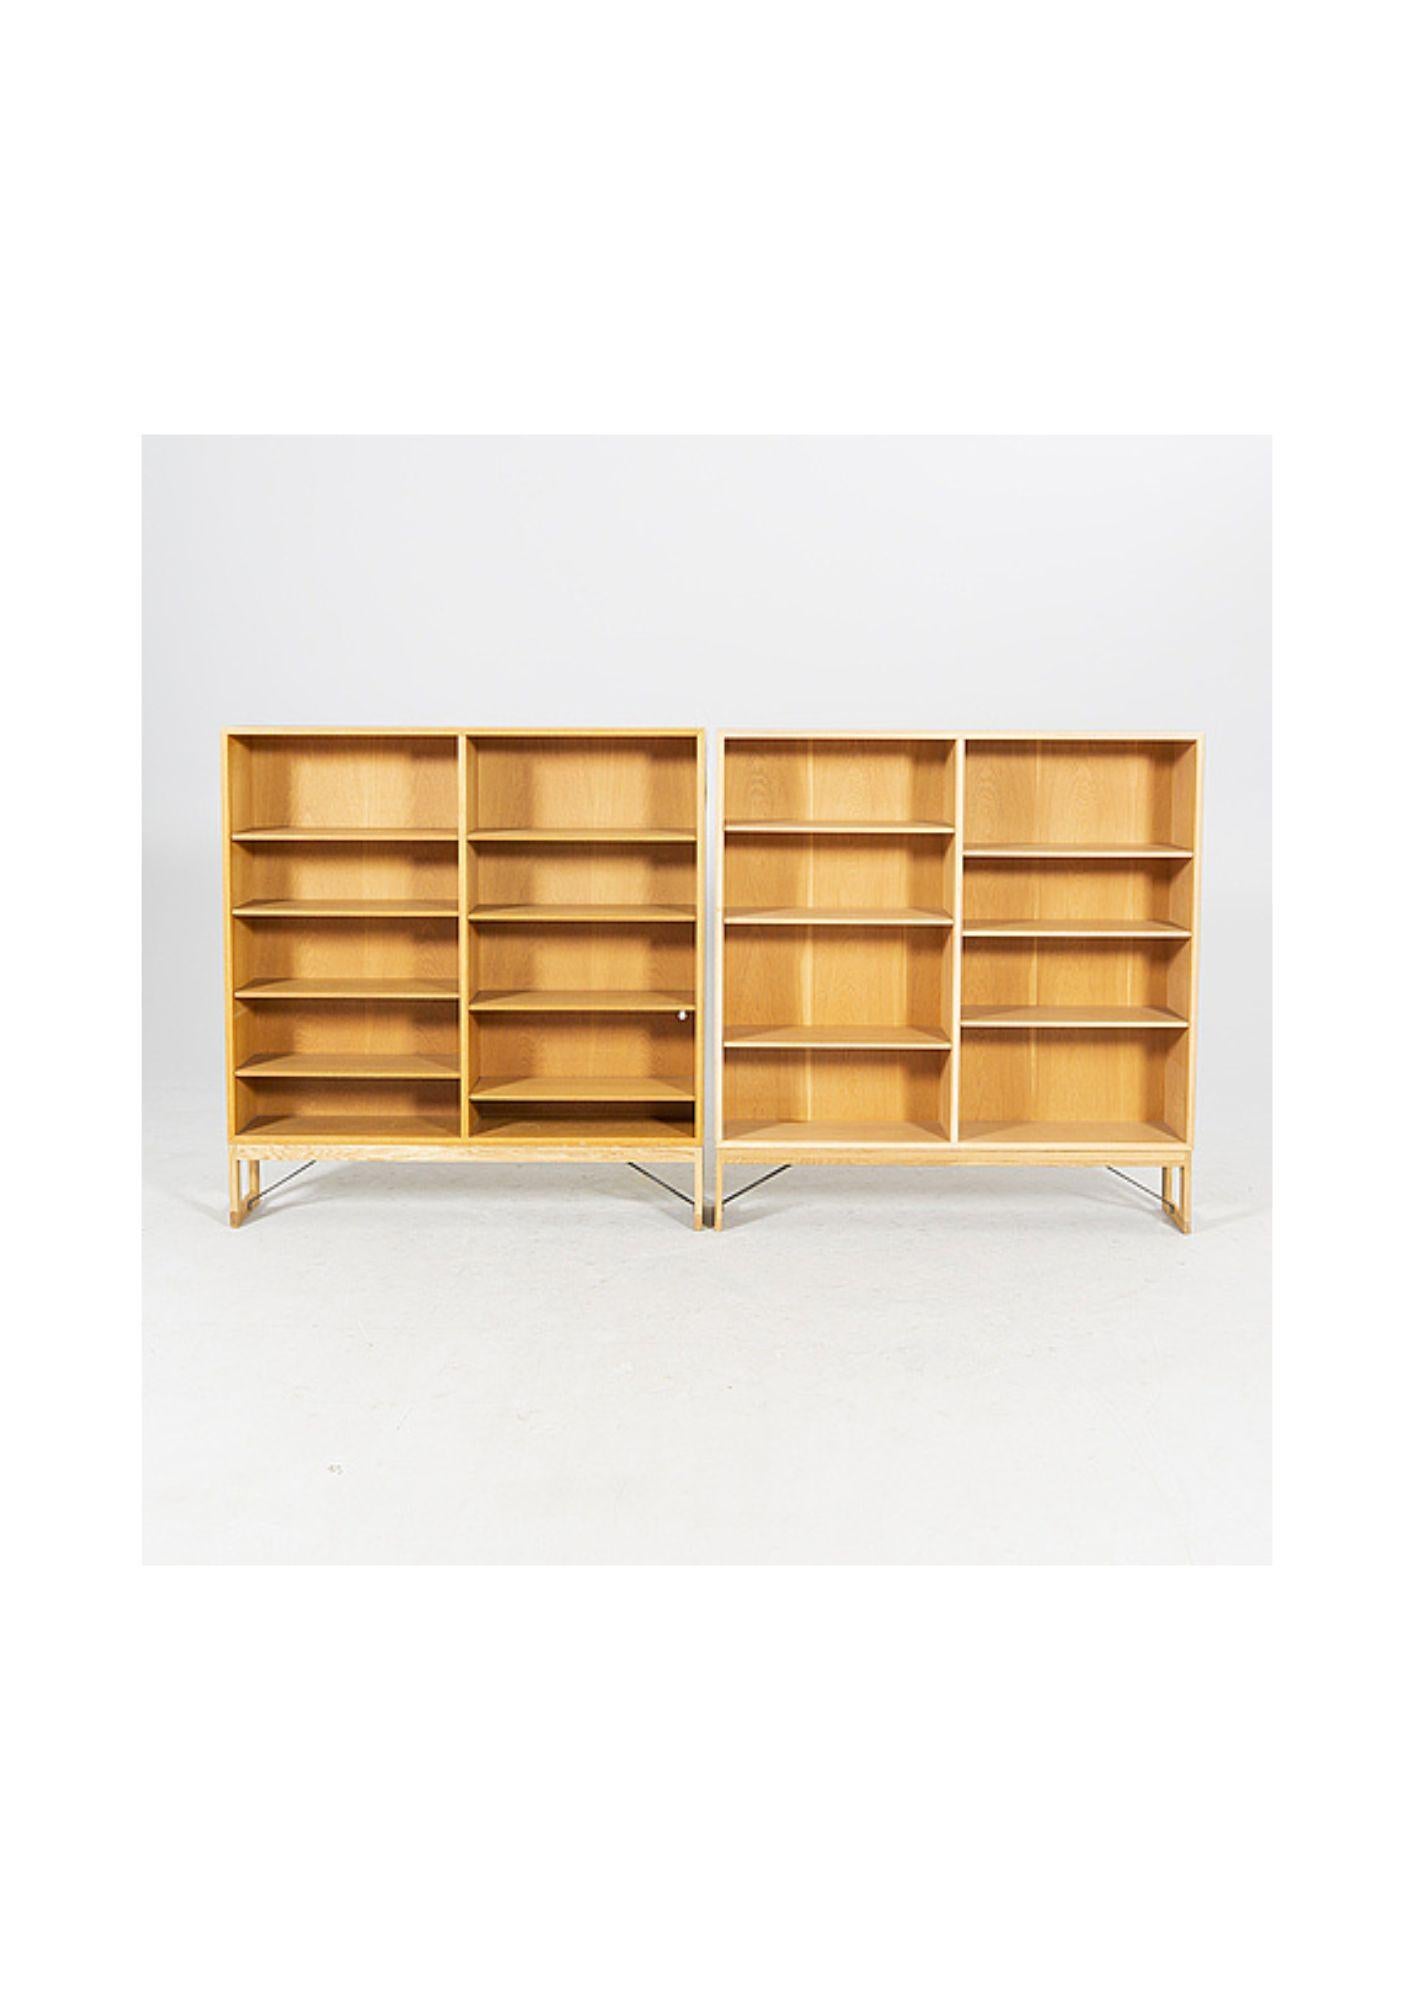 Oak bookcase by Borge Mogensen for Karl Anderson & Soner. This oak bookcase was created in 1955 as part of the Oresund series by Karl Anderson & Soner in collaboration with Borge Mogensen. It has 6 shelves with rectangular legs that allow it to be